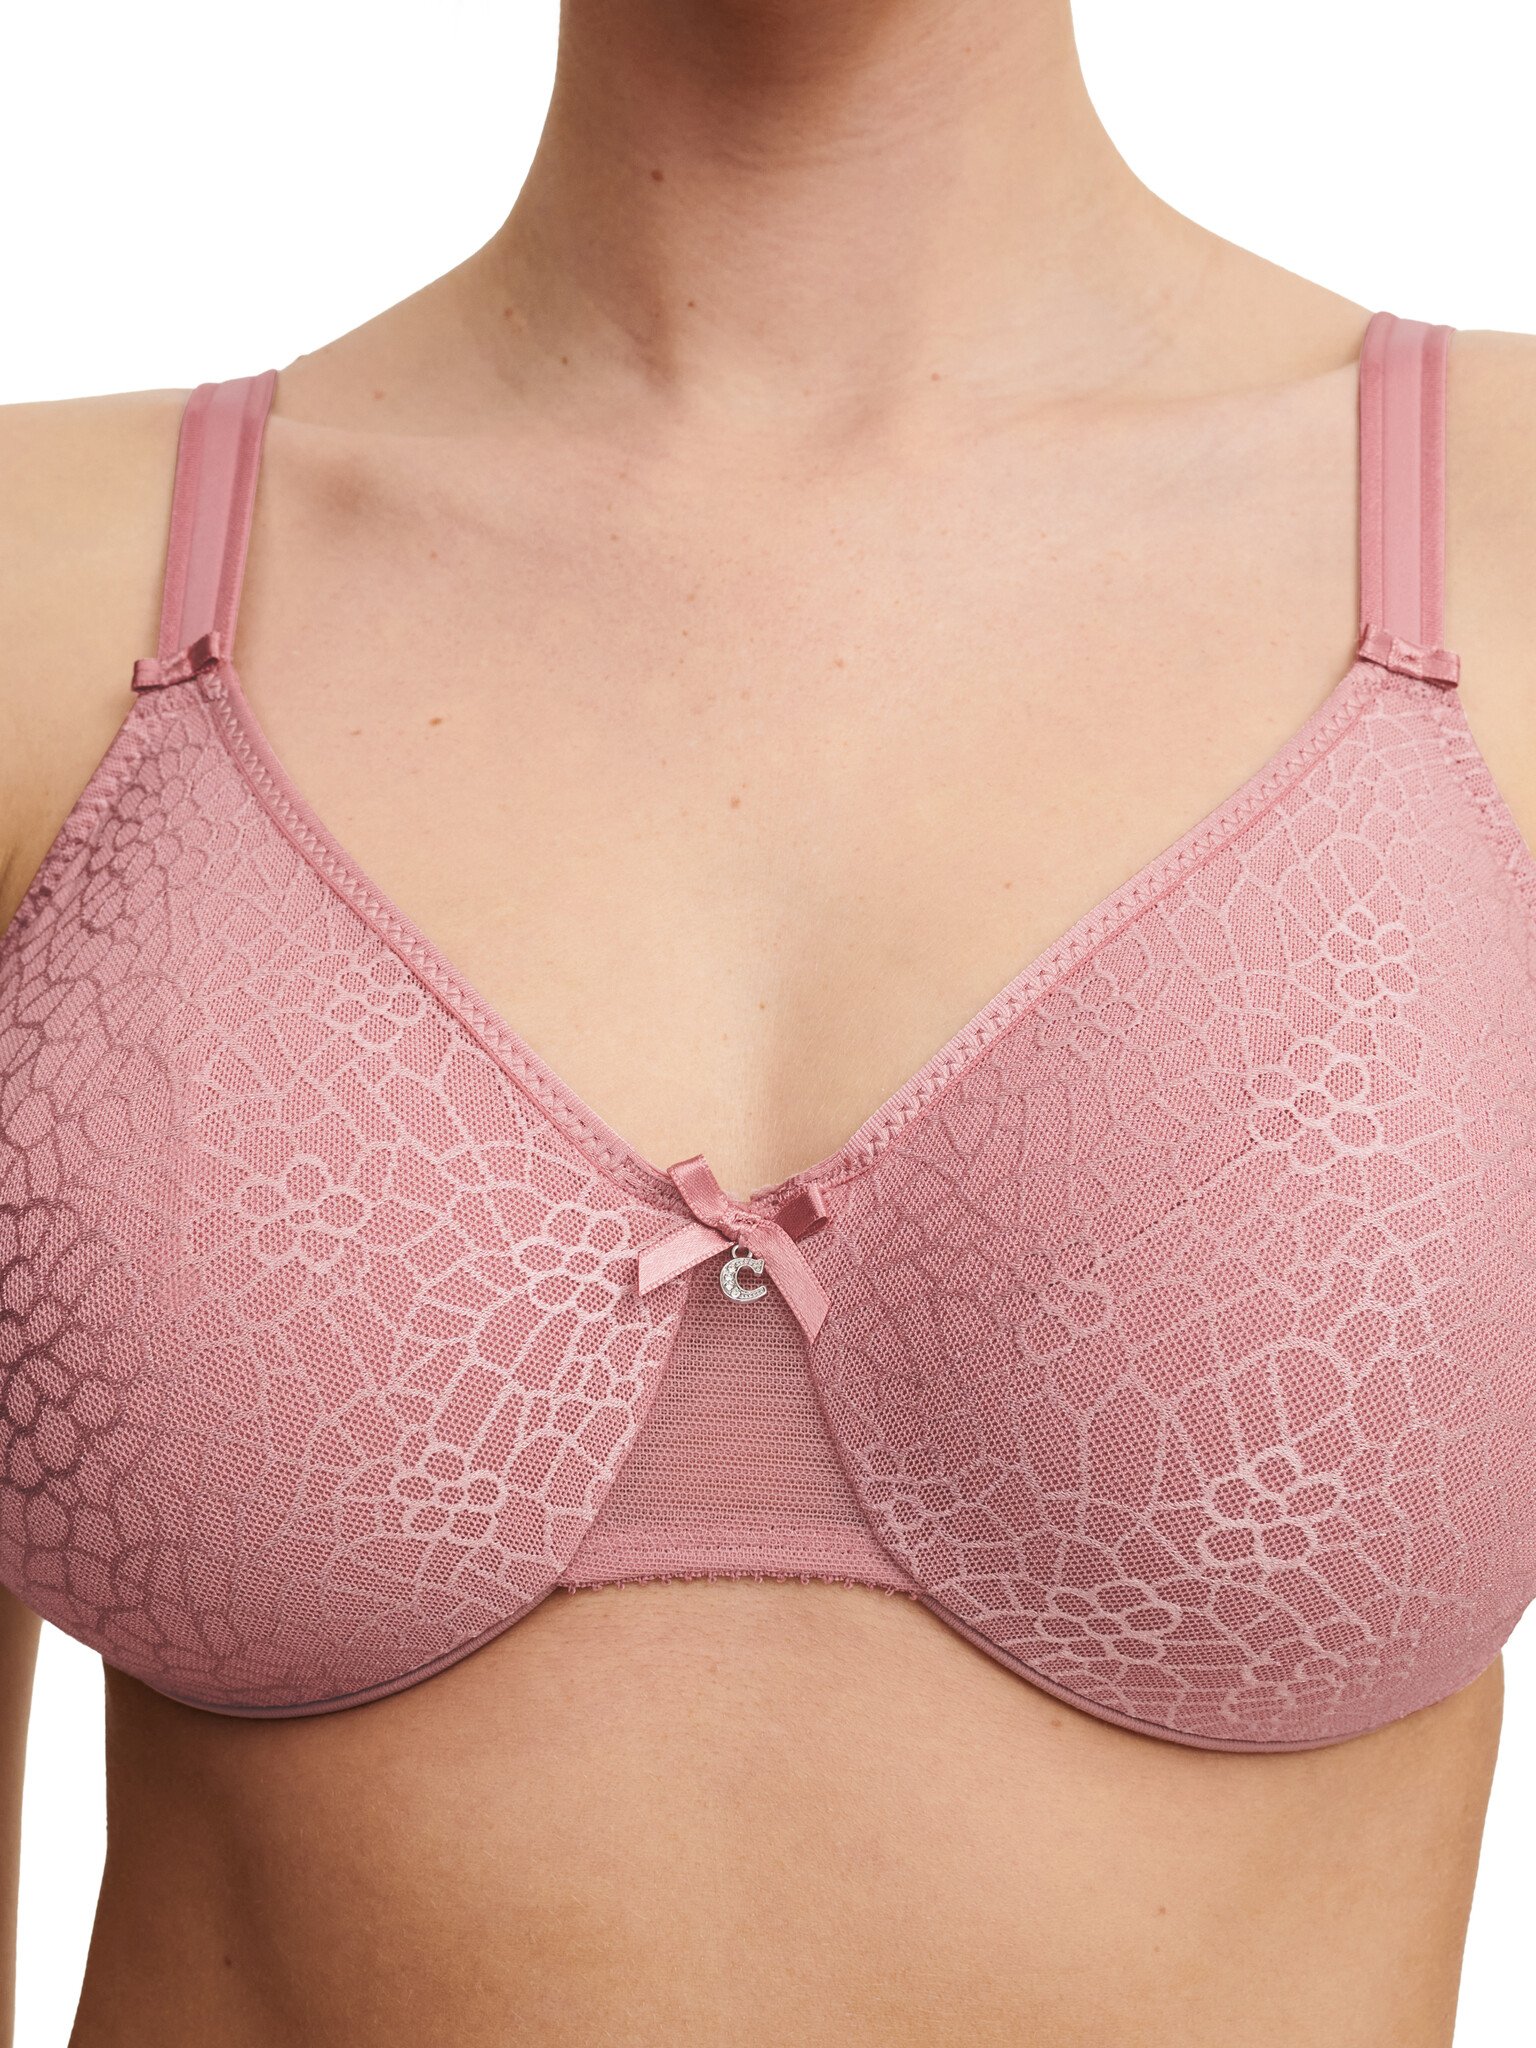 Bras N Things - Extreme Cleavage available in Black, Blushing Pink